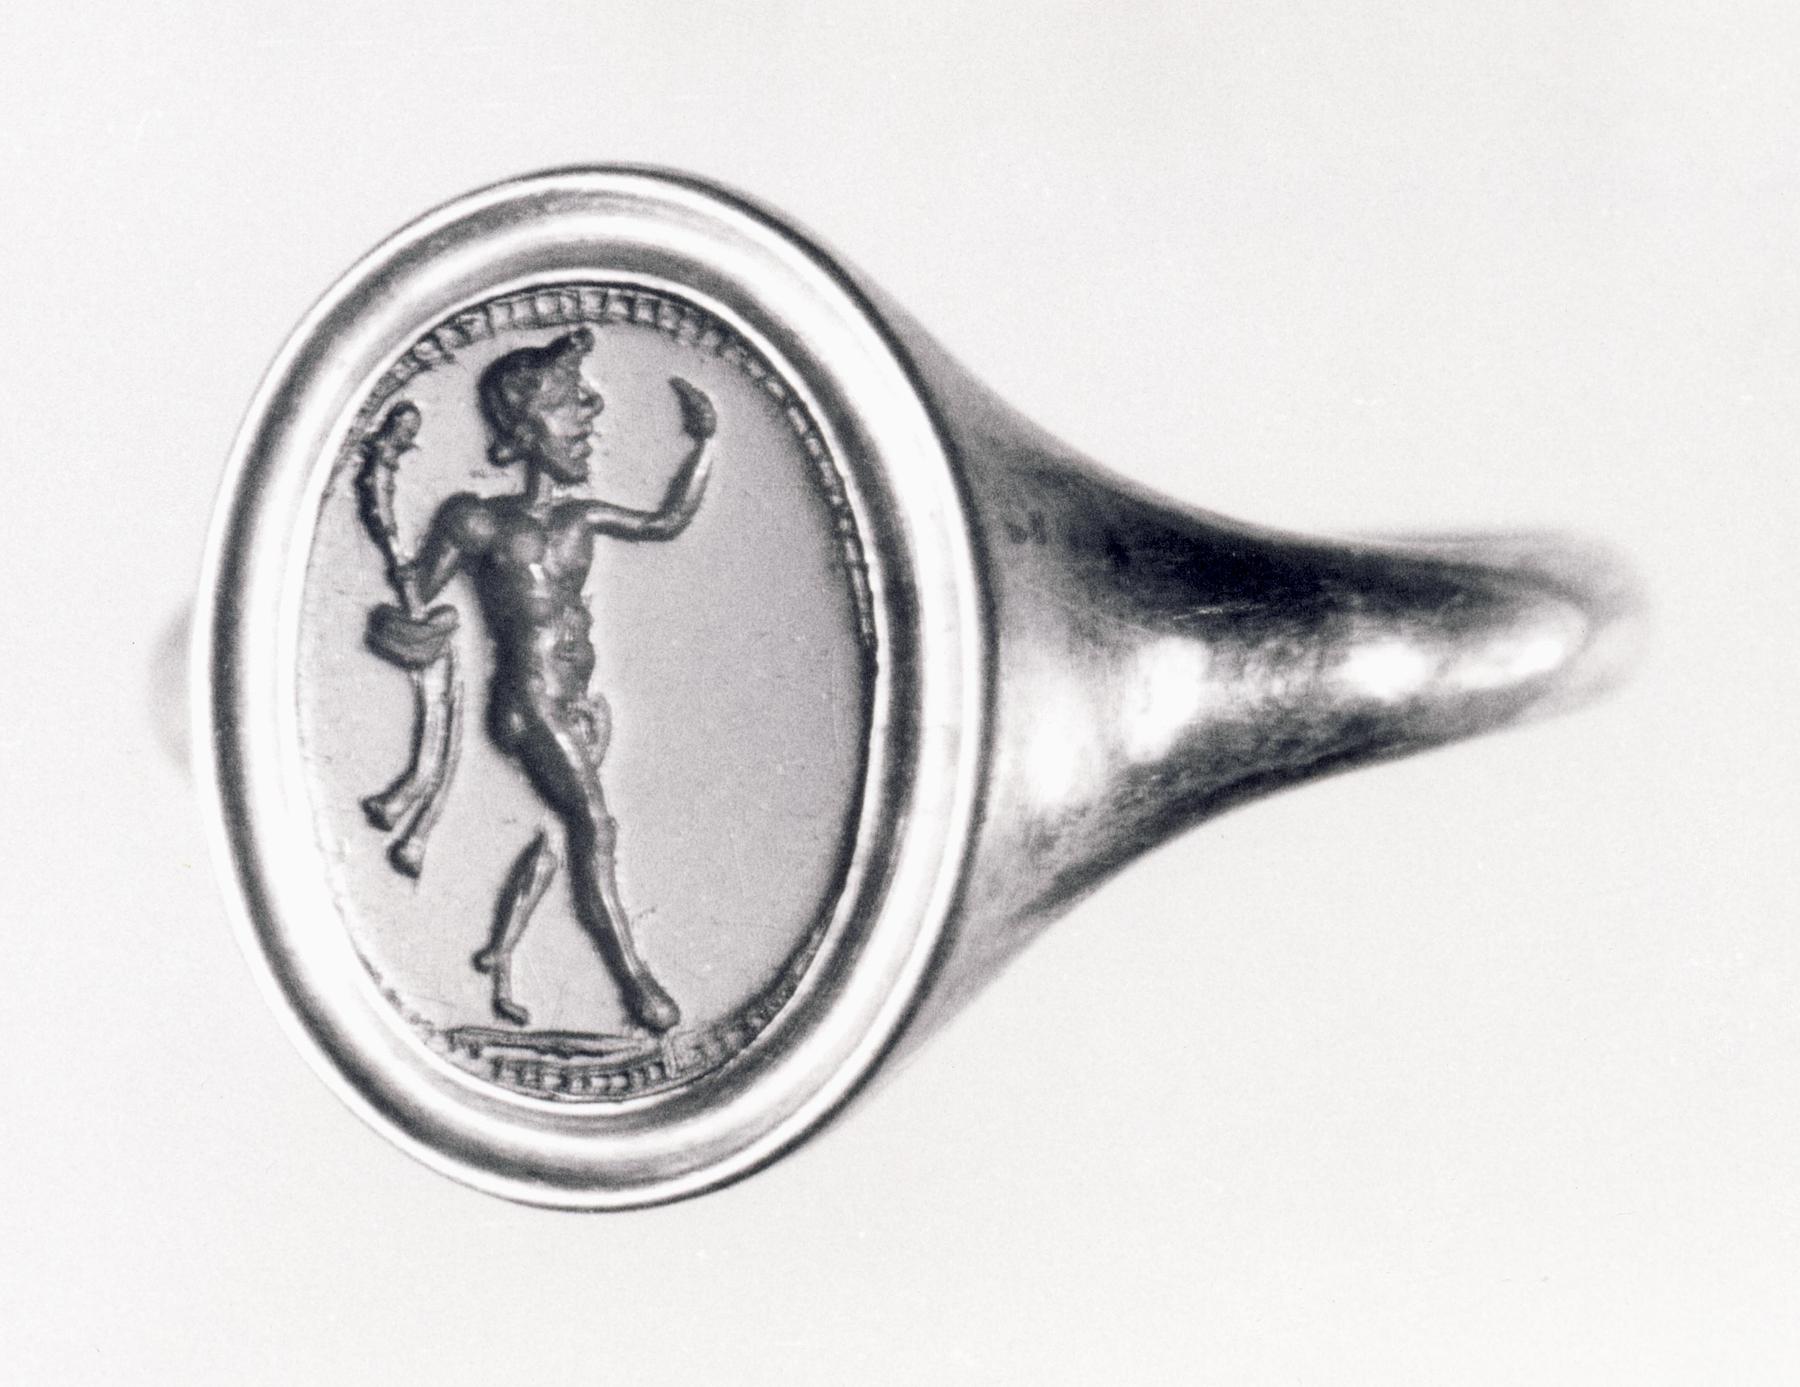 Satyr with a shepherd's crook, I369